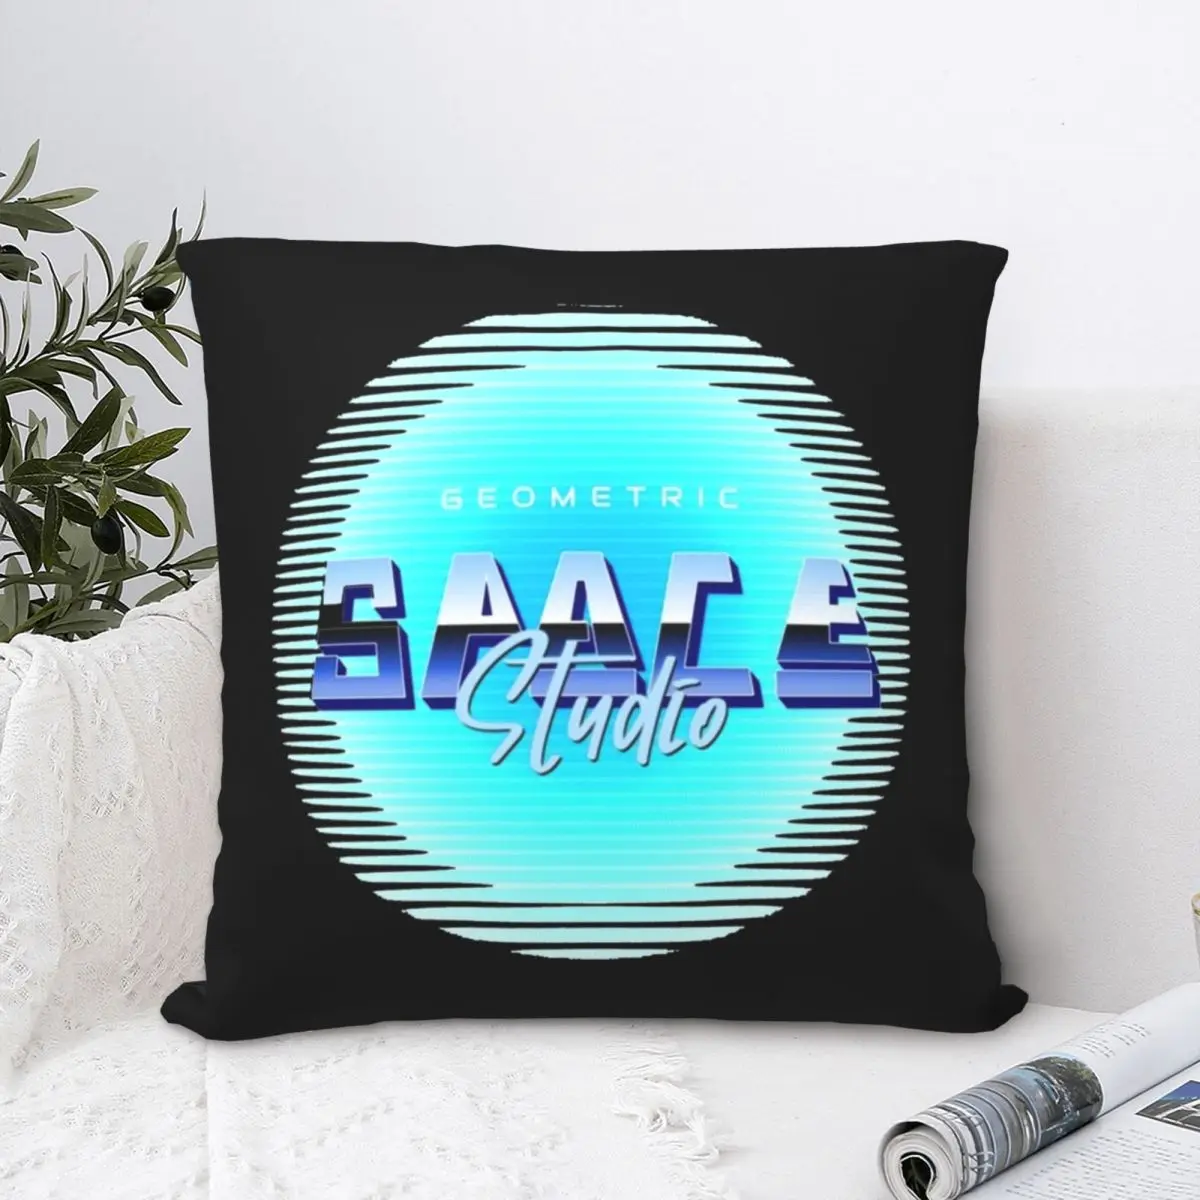 Geometric Space Chiffon Top Square Pillowcase Polyester Pillow Cover Velvet Cushion Zip Decorative Comfort Throw Pillow For Home light blue abstract square pillowcase home supplies decorative cushions 1pc 45 45cm geometric printed polyester pillow cases